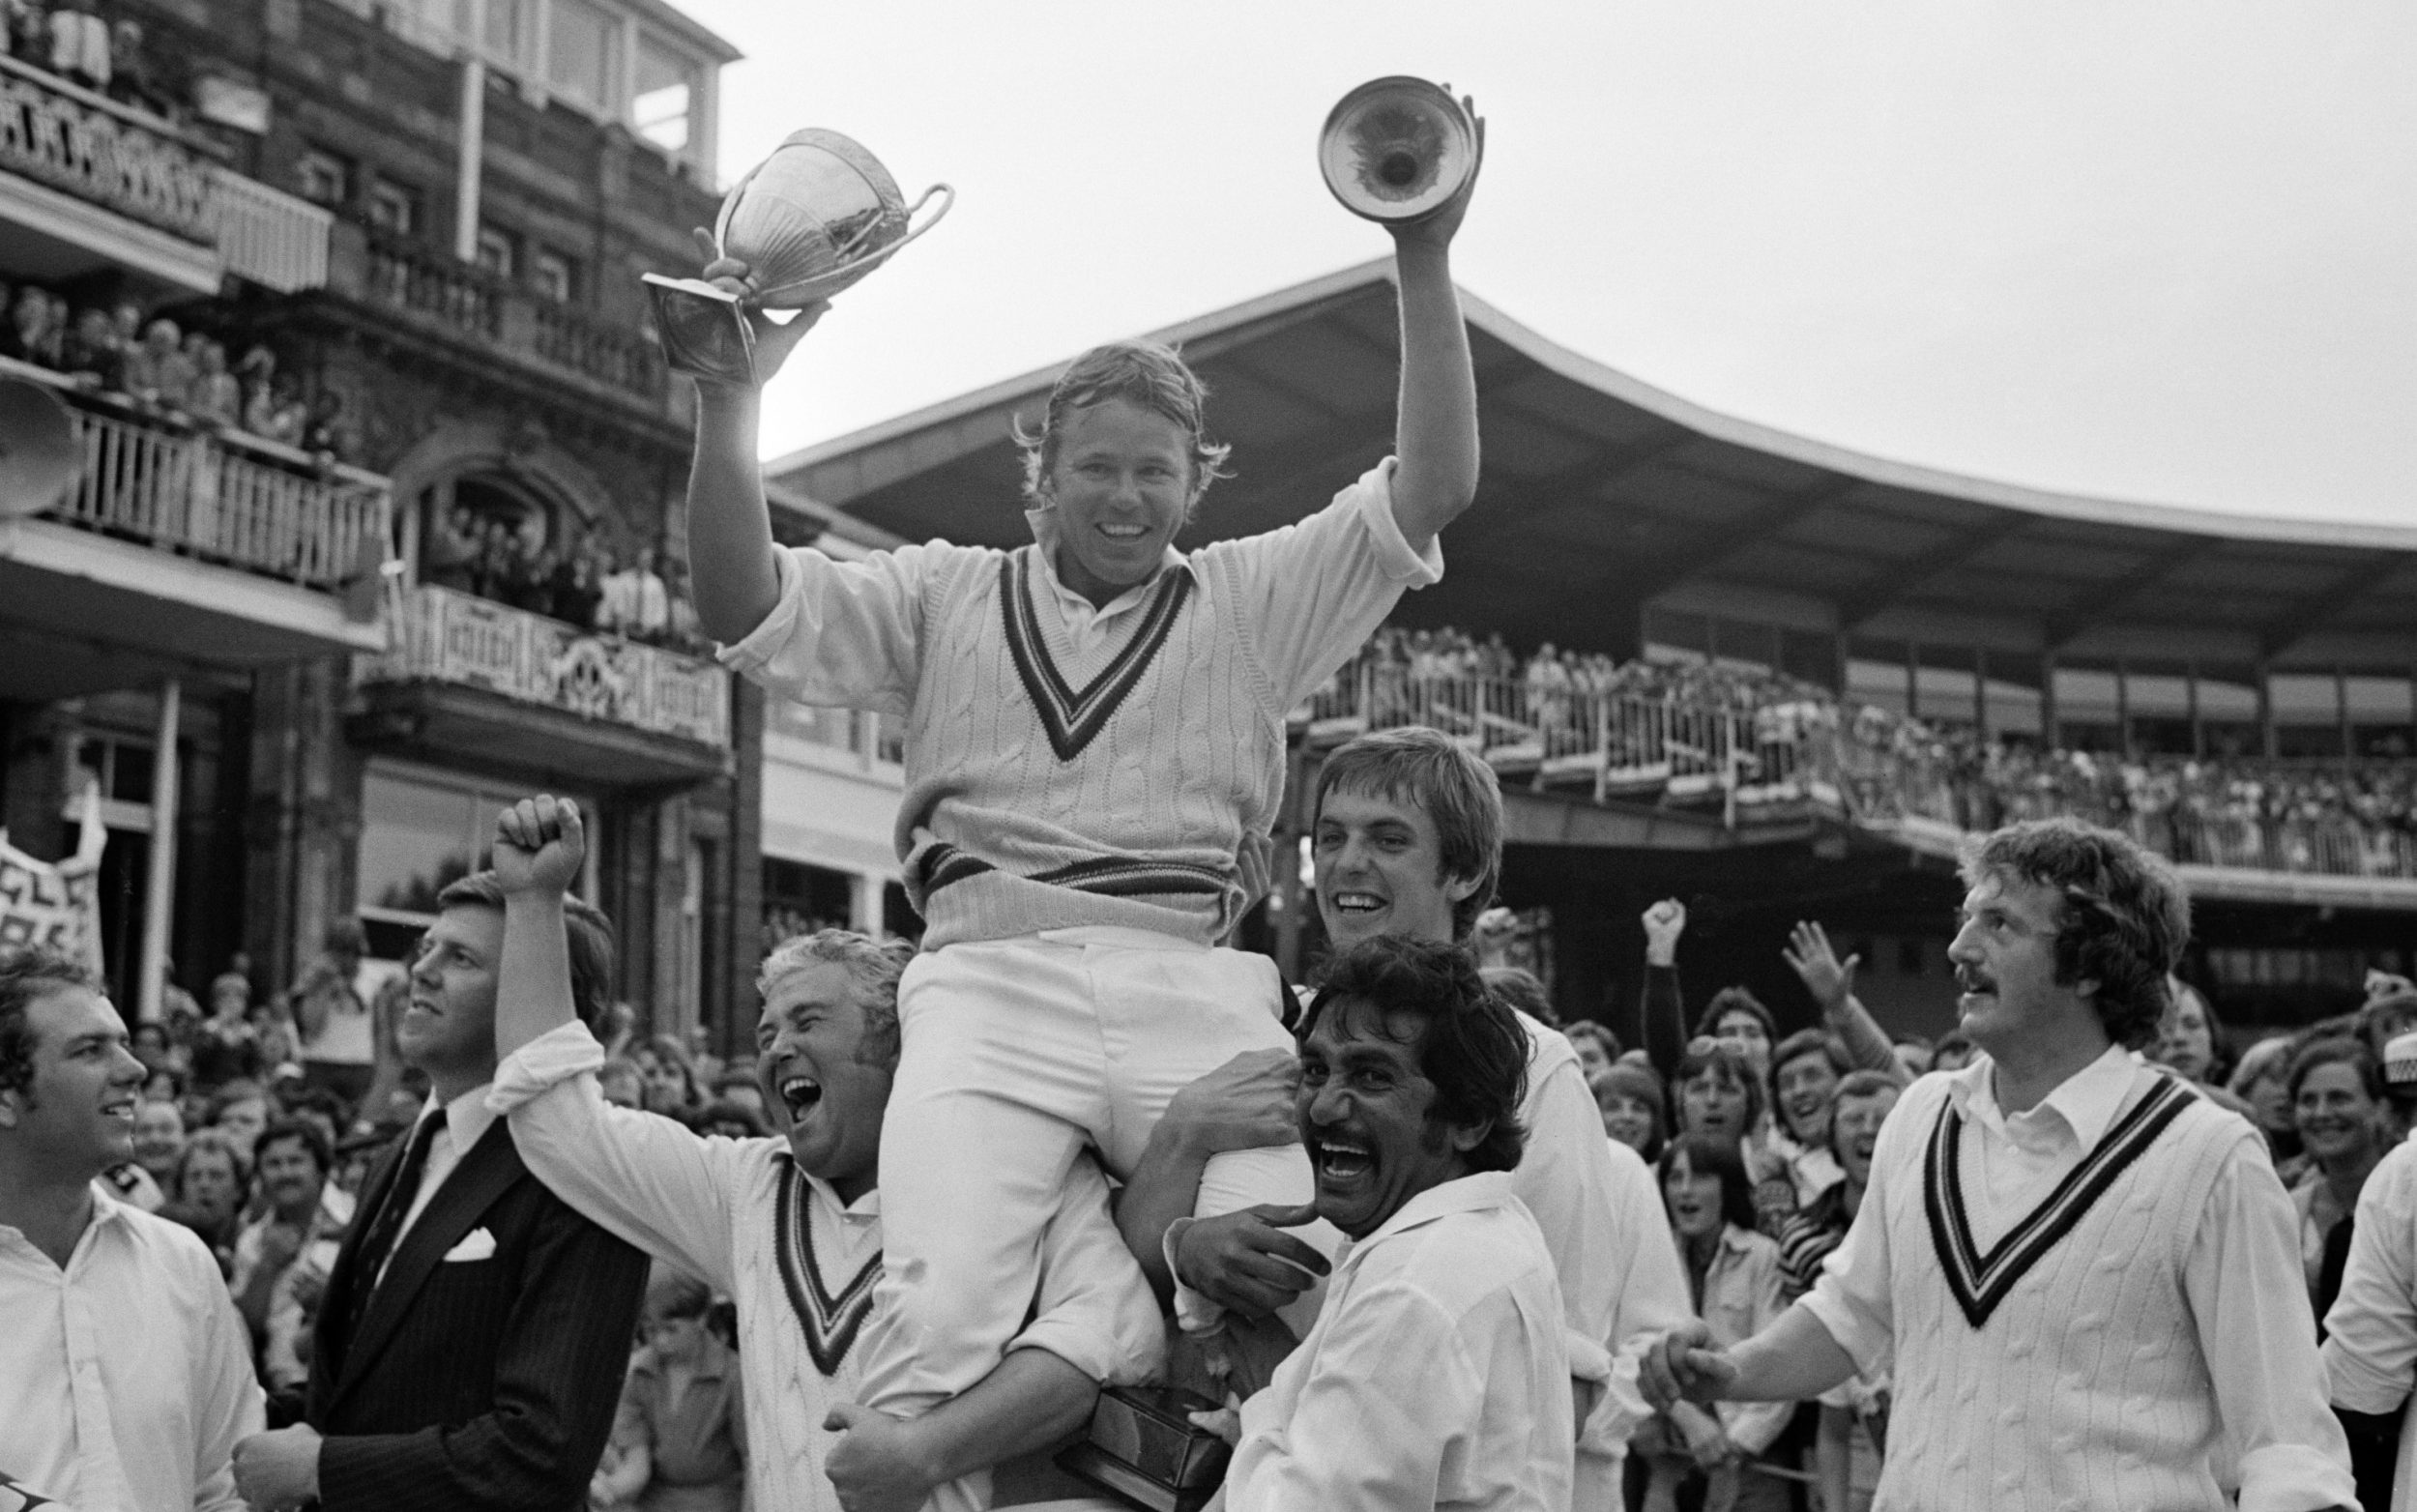 mike procter, cricketing all-rounder who lost out to apartheid but led gloucestershire to glory – obituary